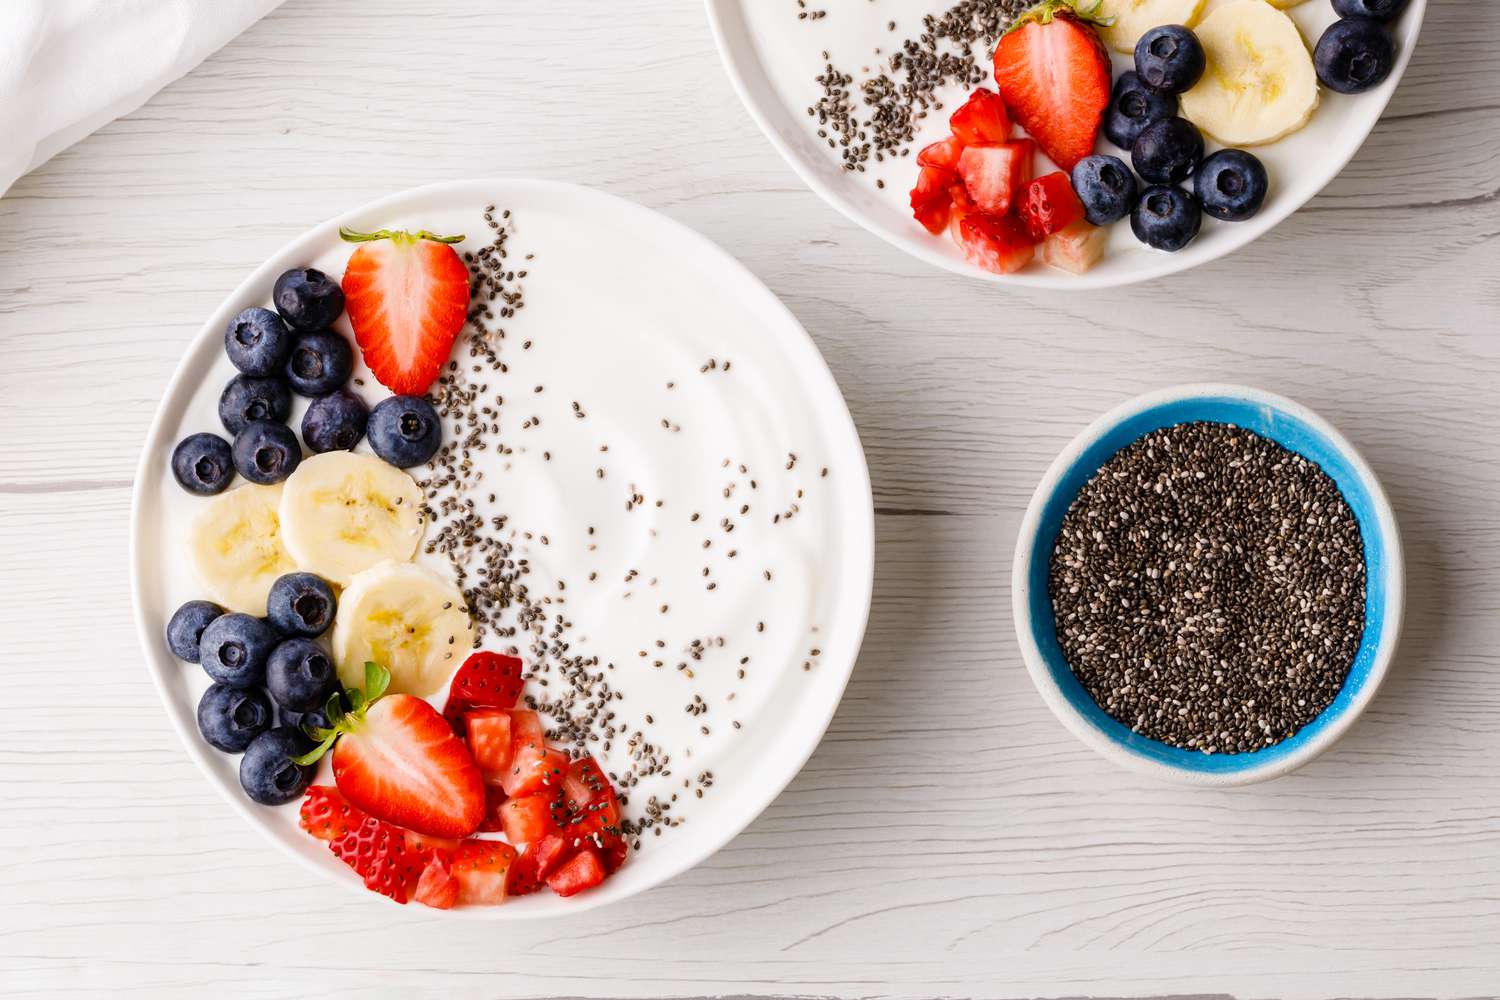 What Can You Eat Chia Seeds With